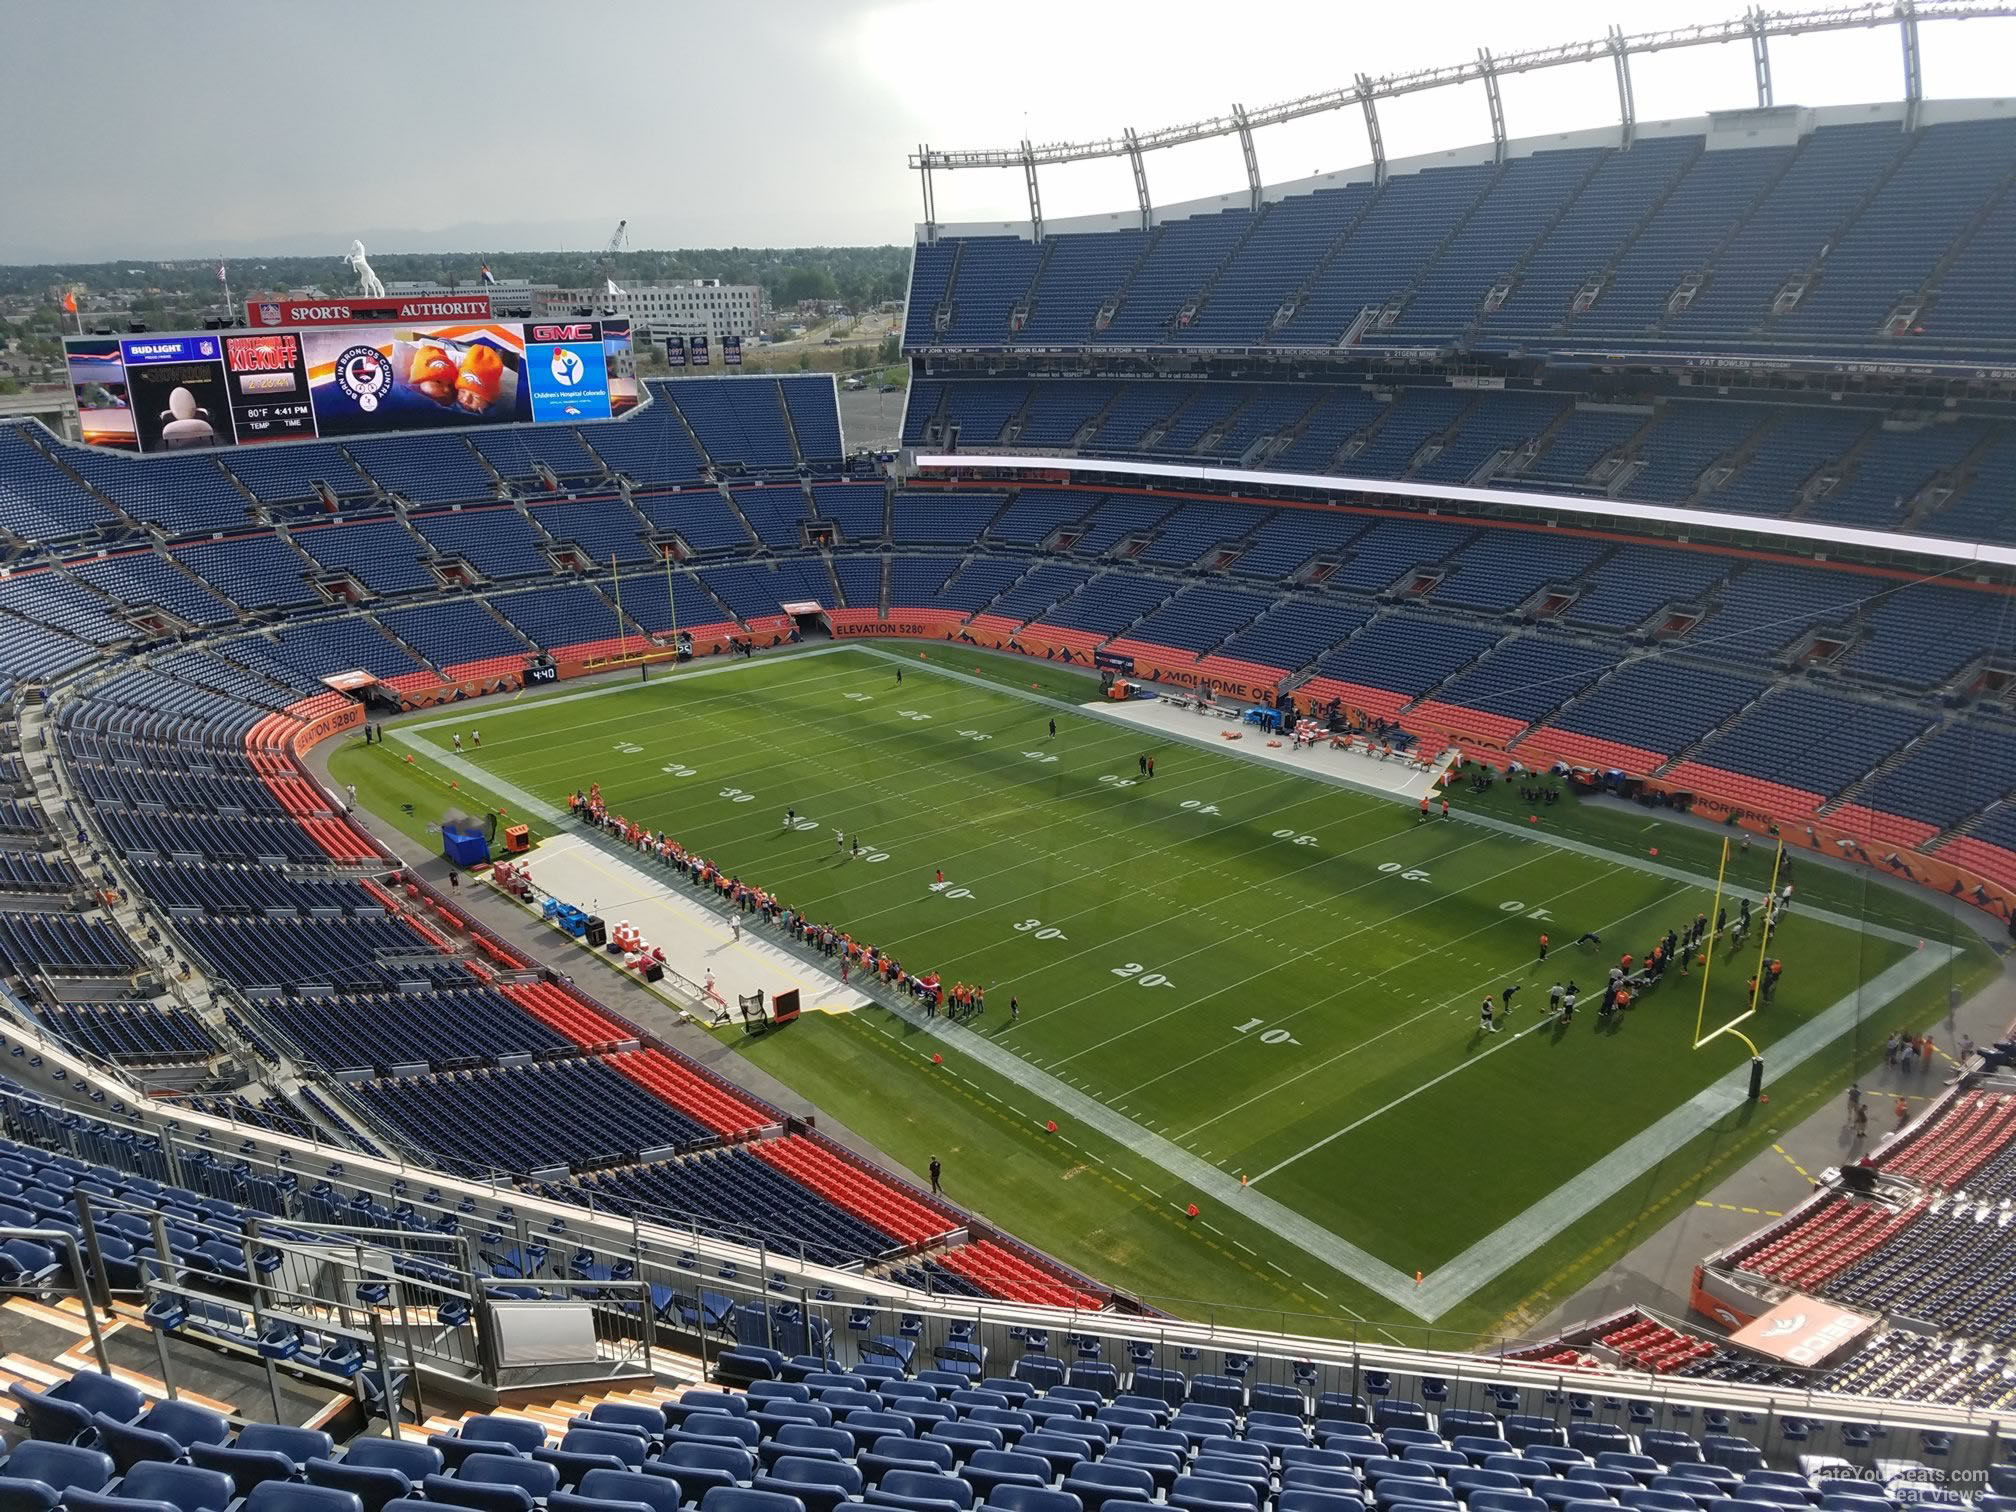 section 527, row 16 seat view  - empower field (at mile high)